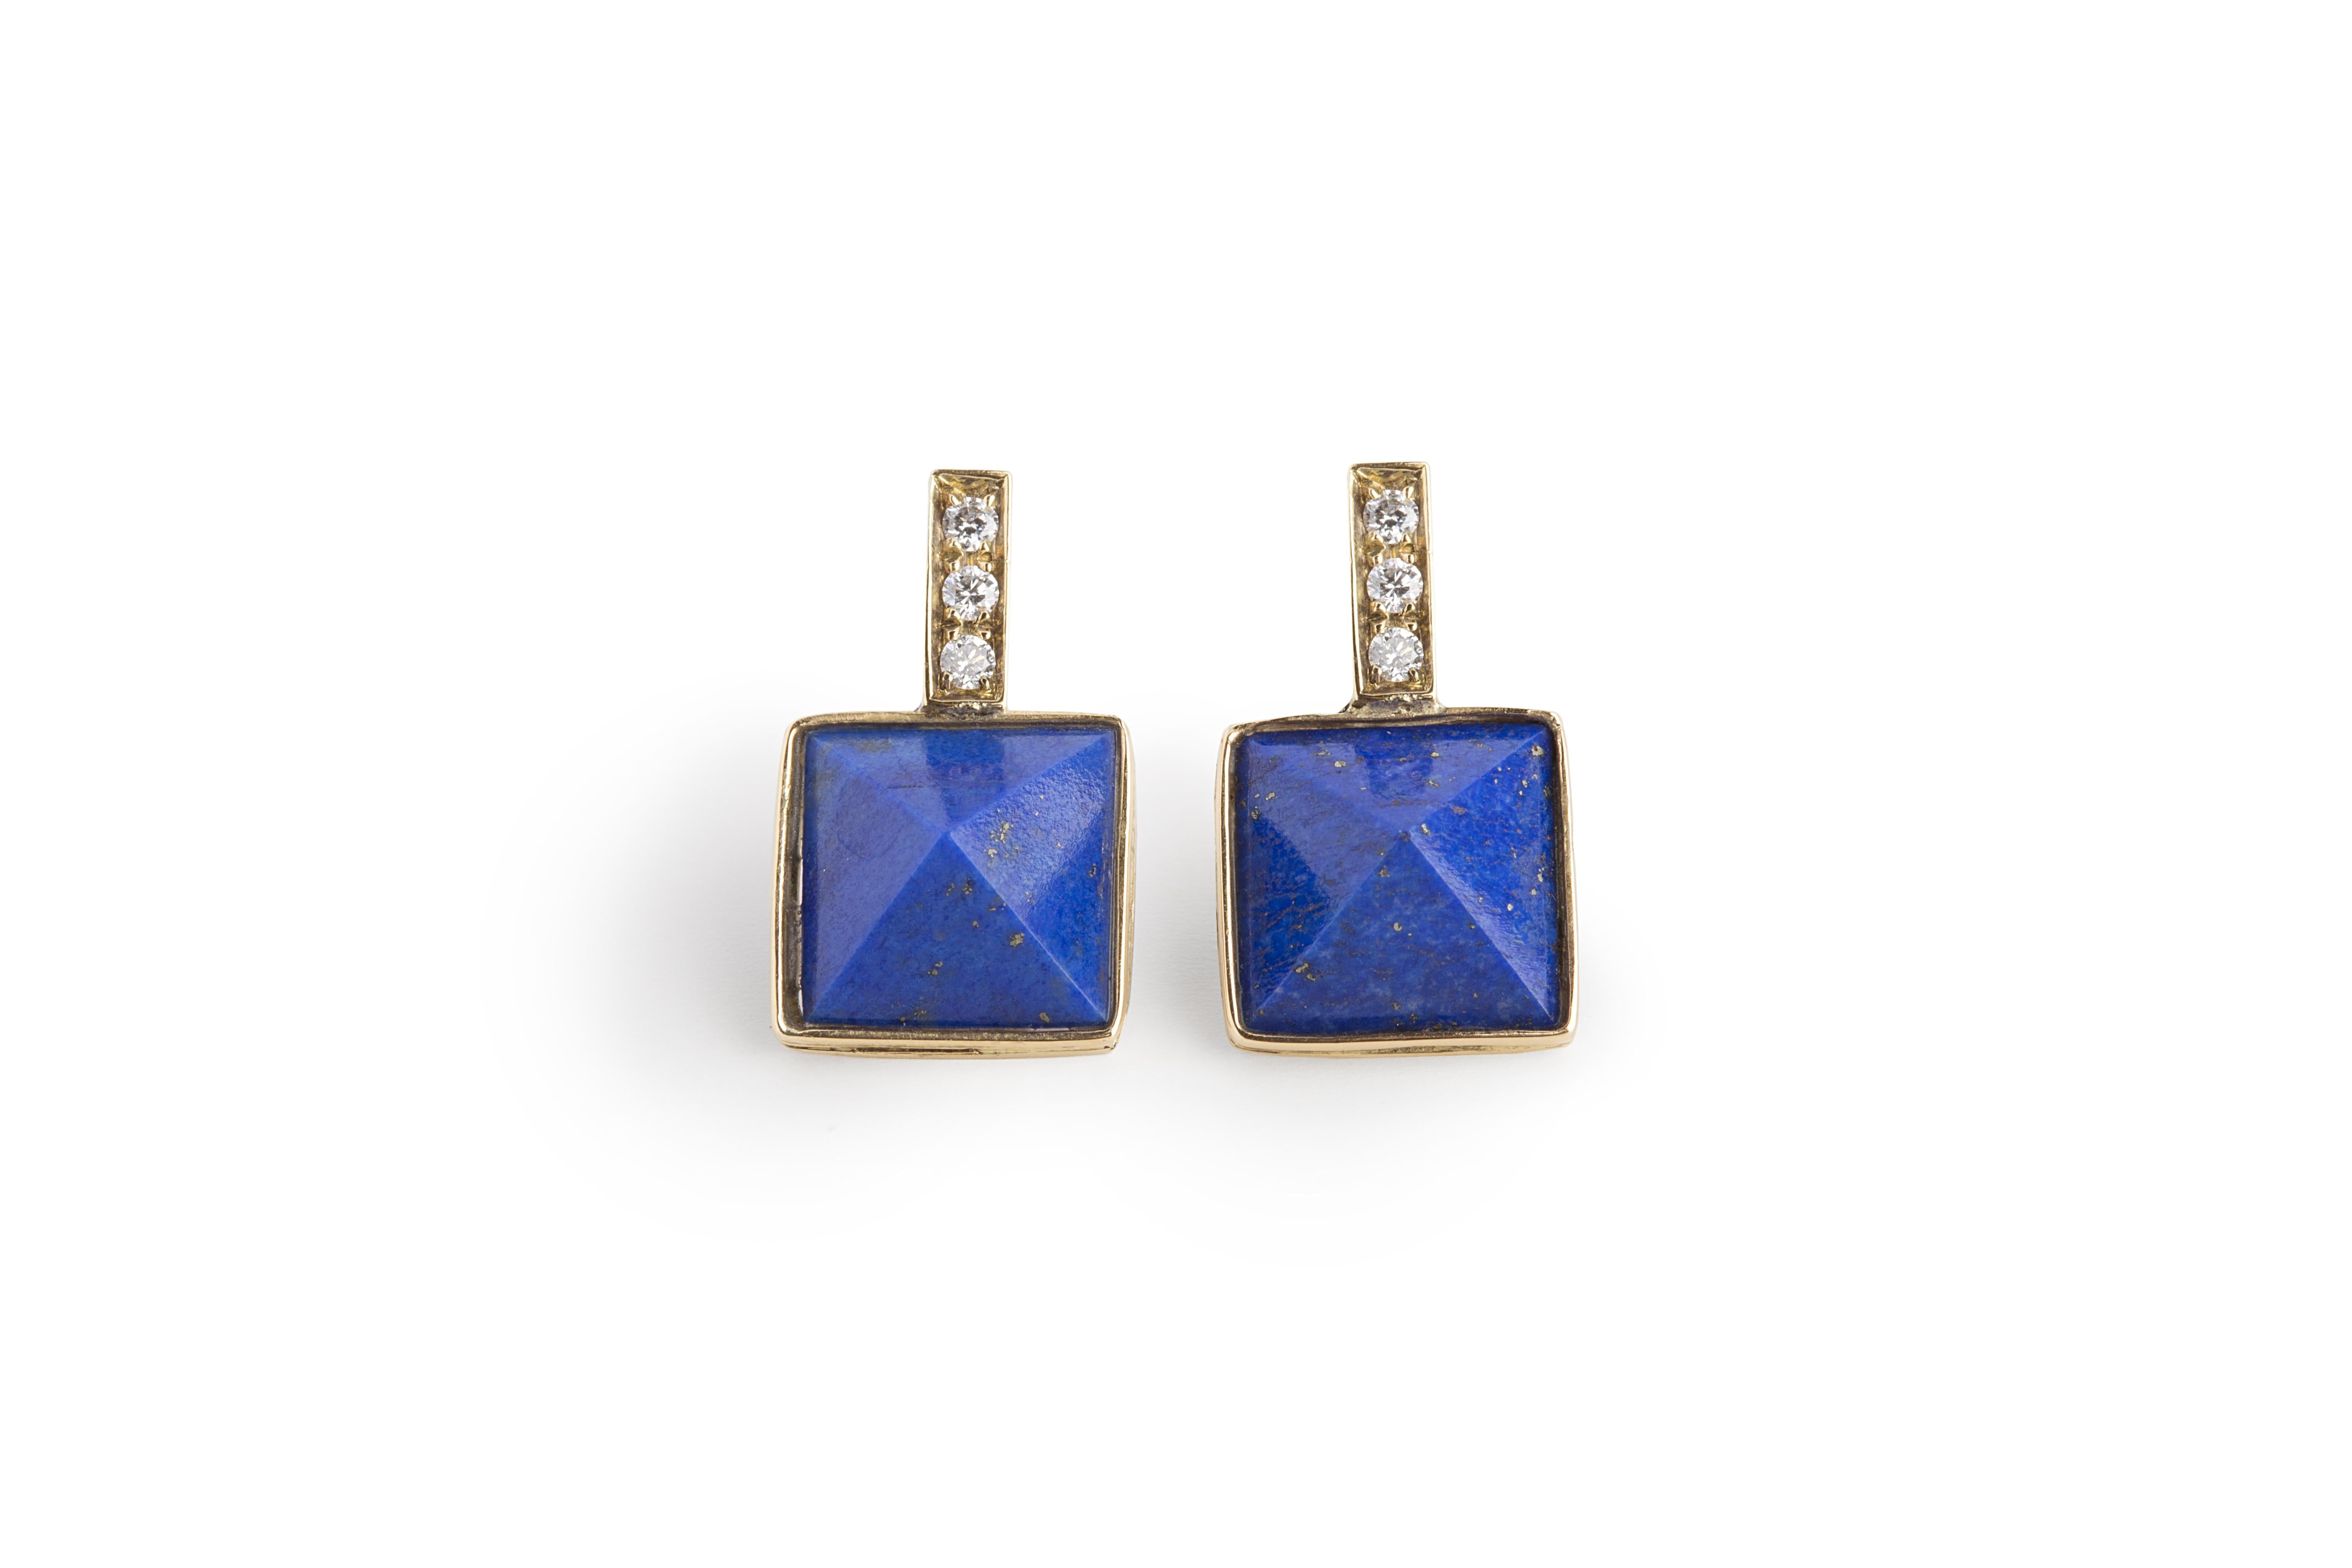 Rossella Ugolini Design Collection, Lapis Lazuli Diamonds Stud Earrings.
Openly inspired by the Italian Castle Architecture, this beautiful pair of design stud earrings is handcrafted in 18 karat yellow gold enriched with luminous 0.12 karat